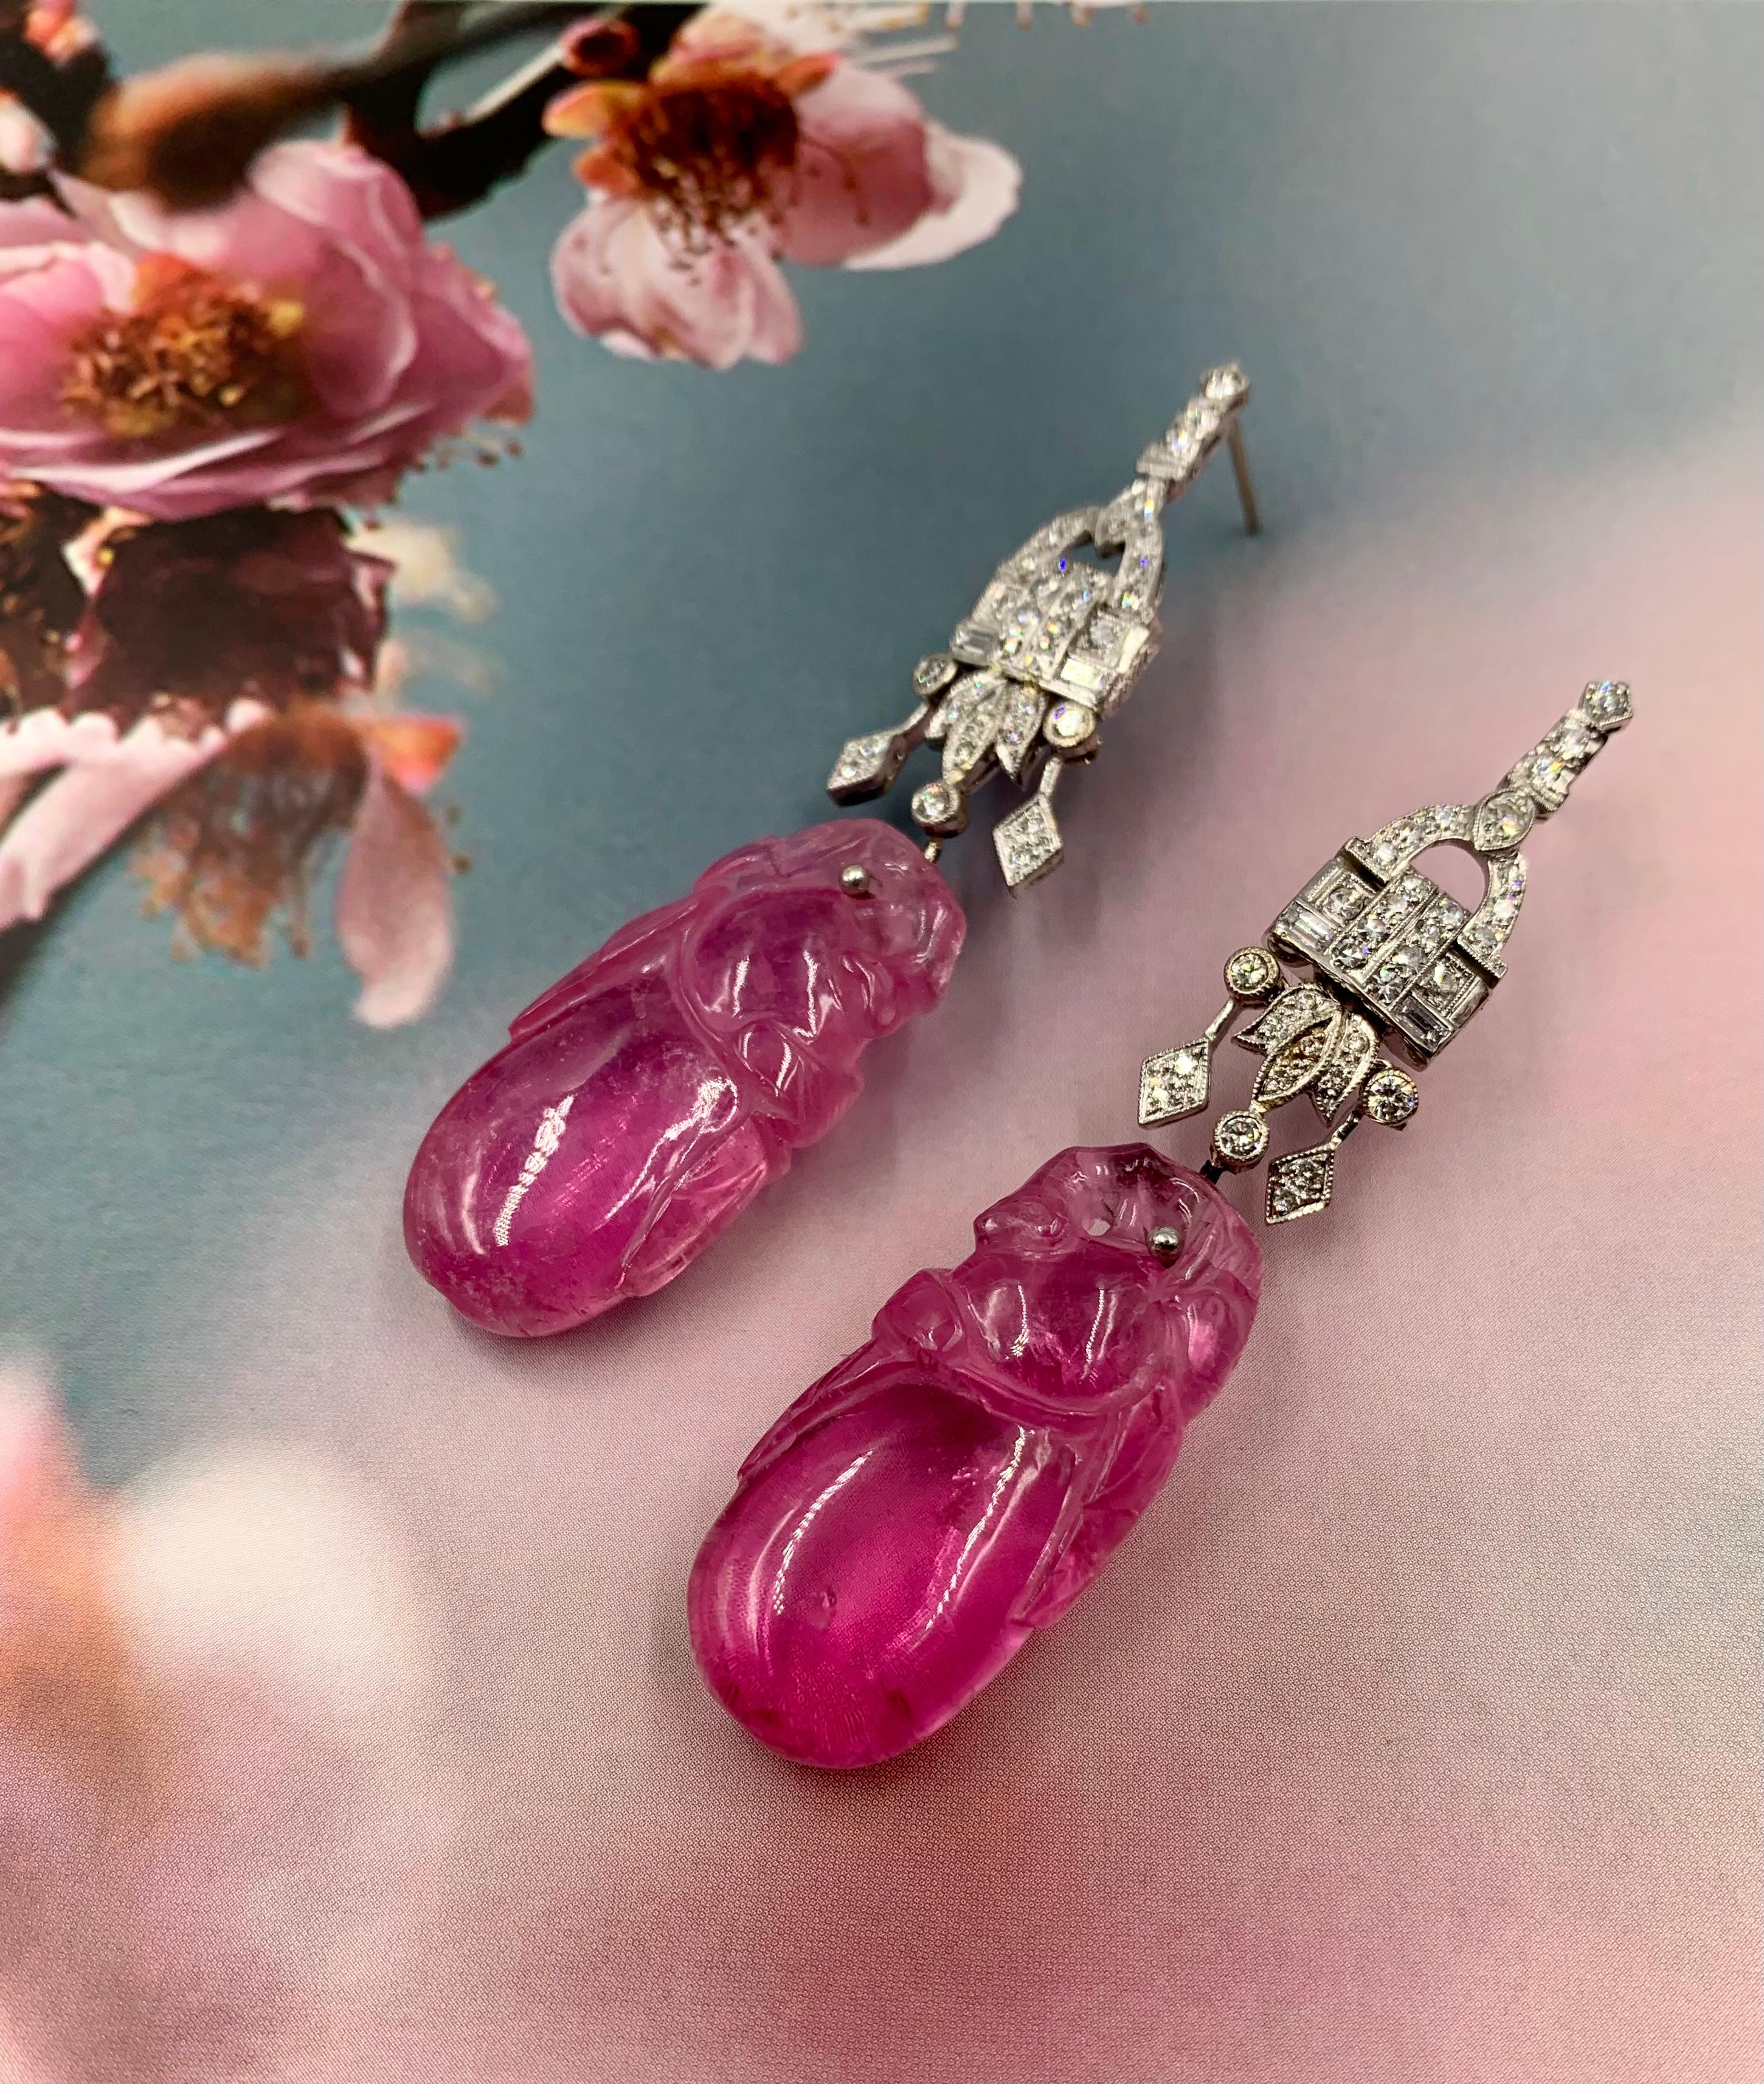 Late Qing
The antique Chinese tourmaline carvings depicting a pair of birds, perhaps magpies, on a gourd, a symbol of mystery, longevity and used as an amulet. The pair of magpies representing double happiness. 
Tourmalines: Each measuring 32mm by